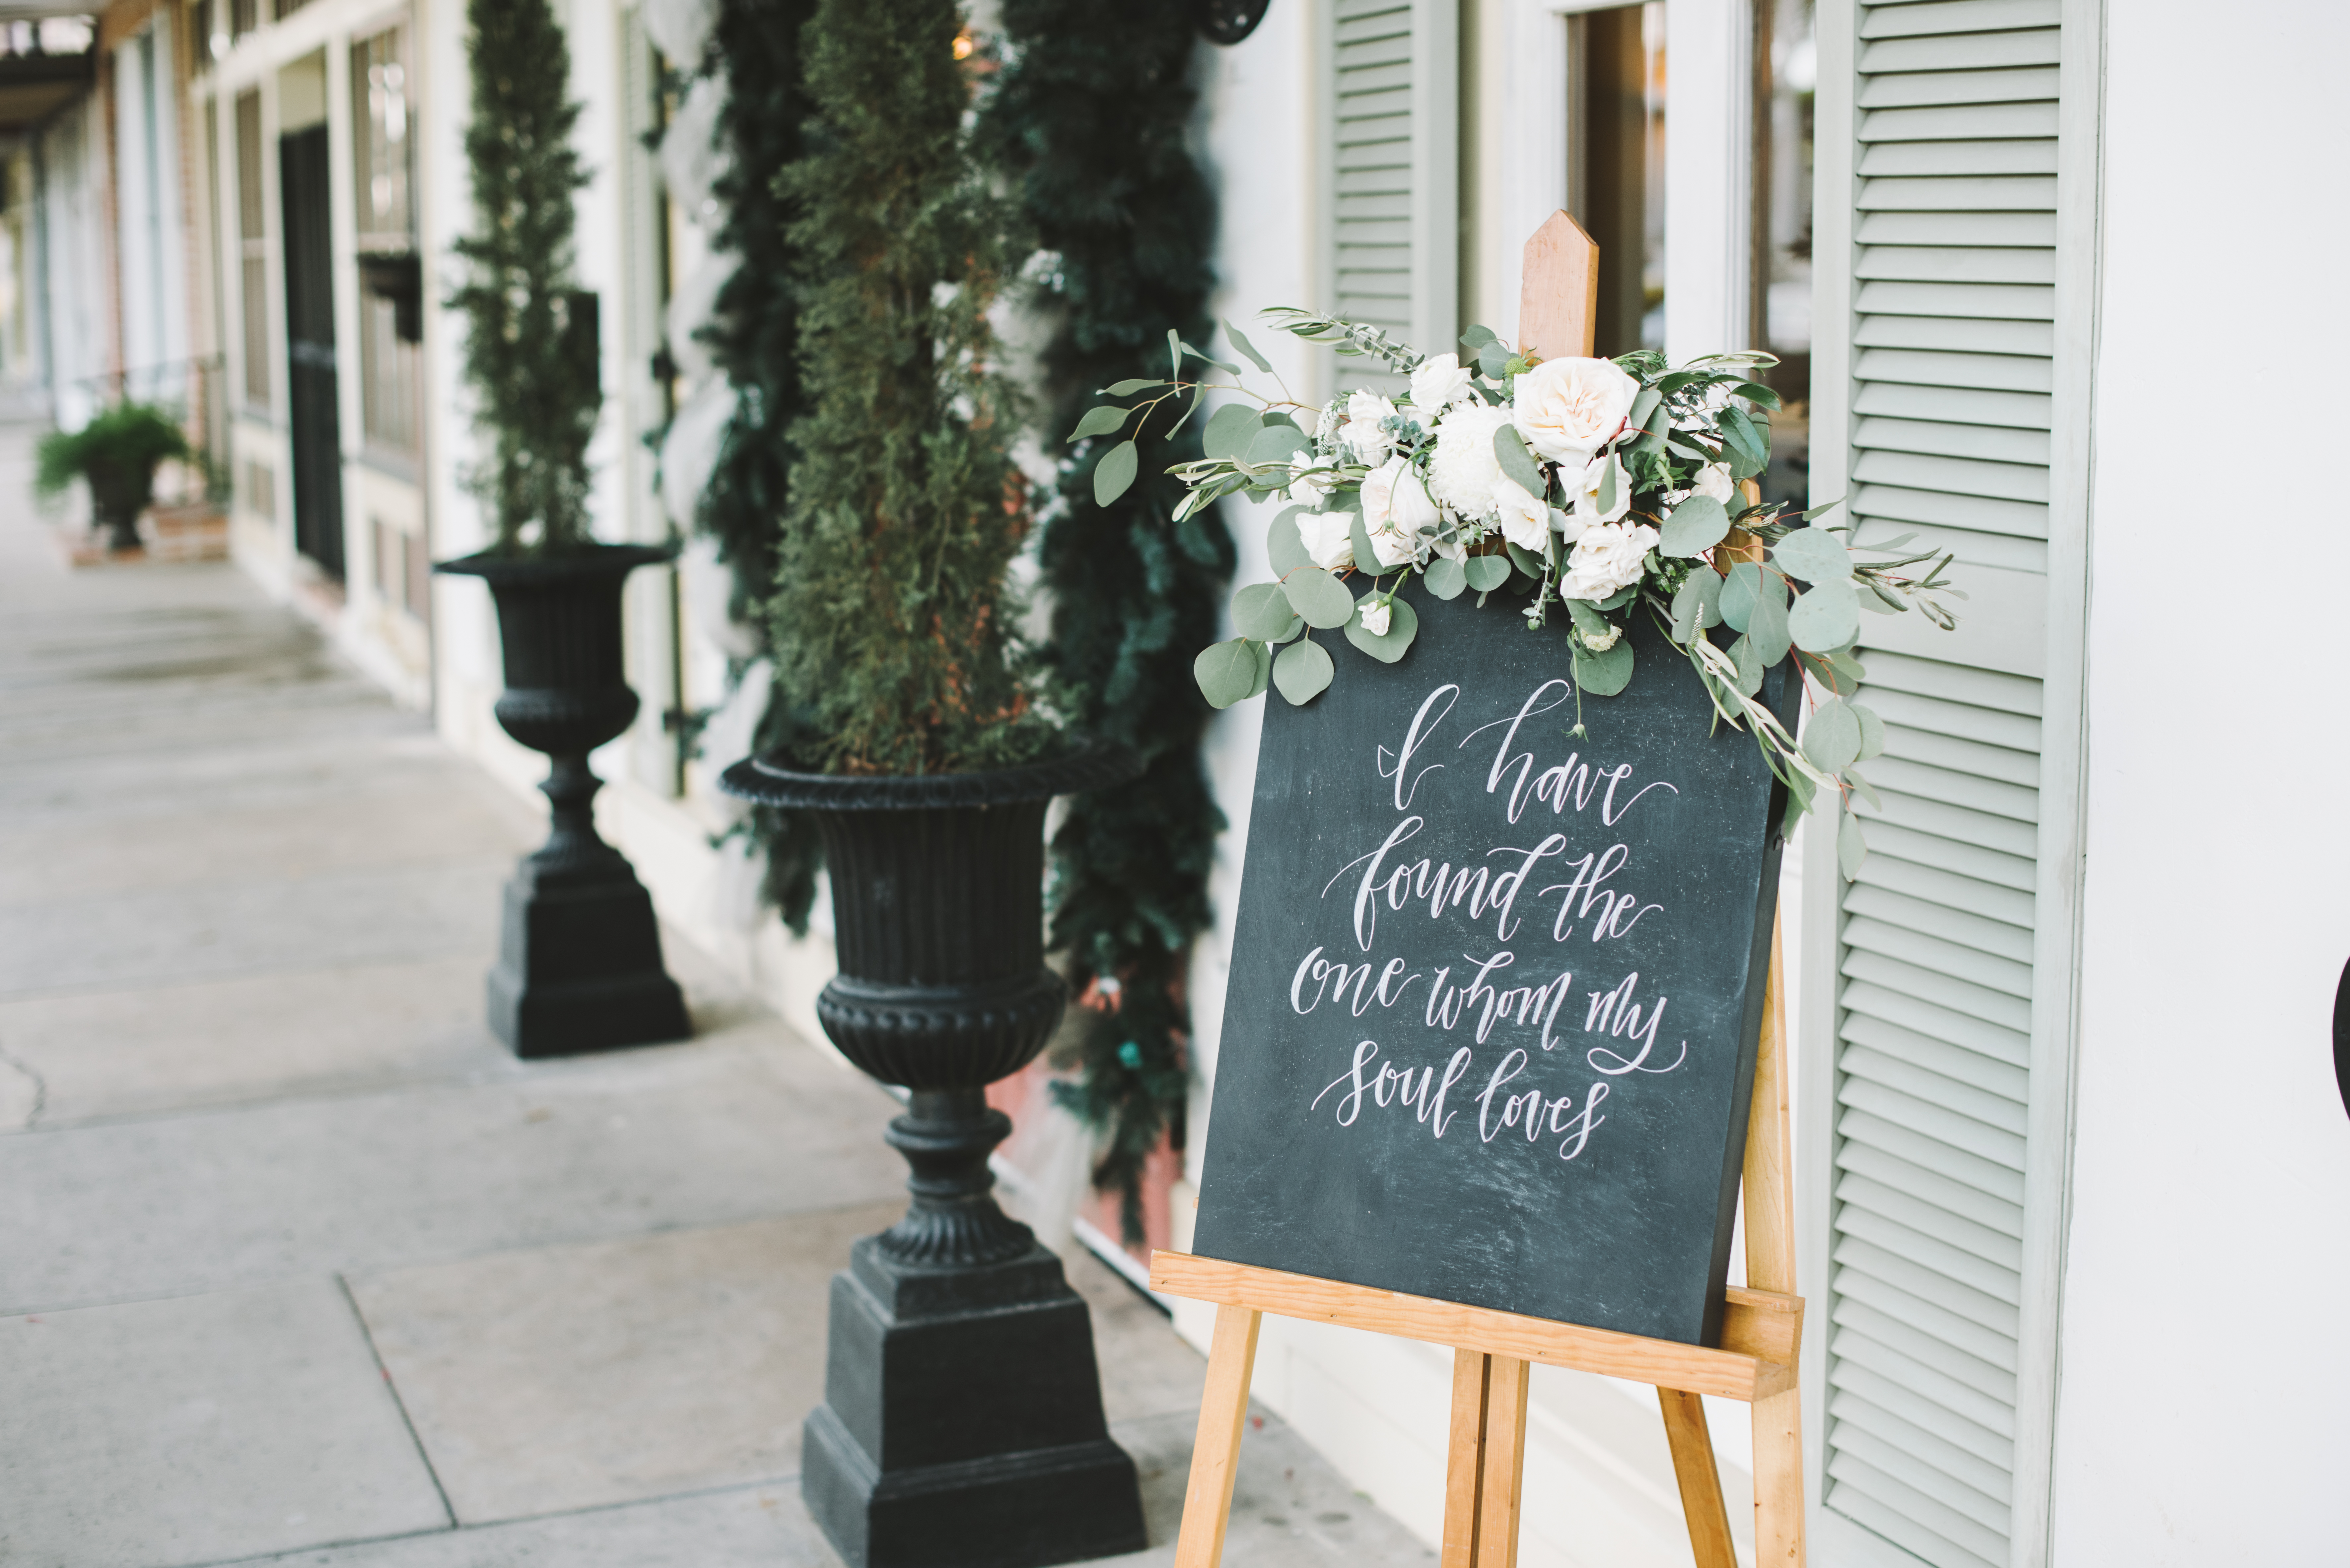 "I have found the one my soul loves" wedding signage.